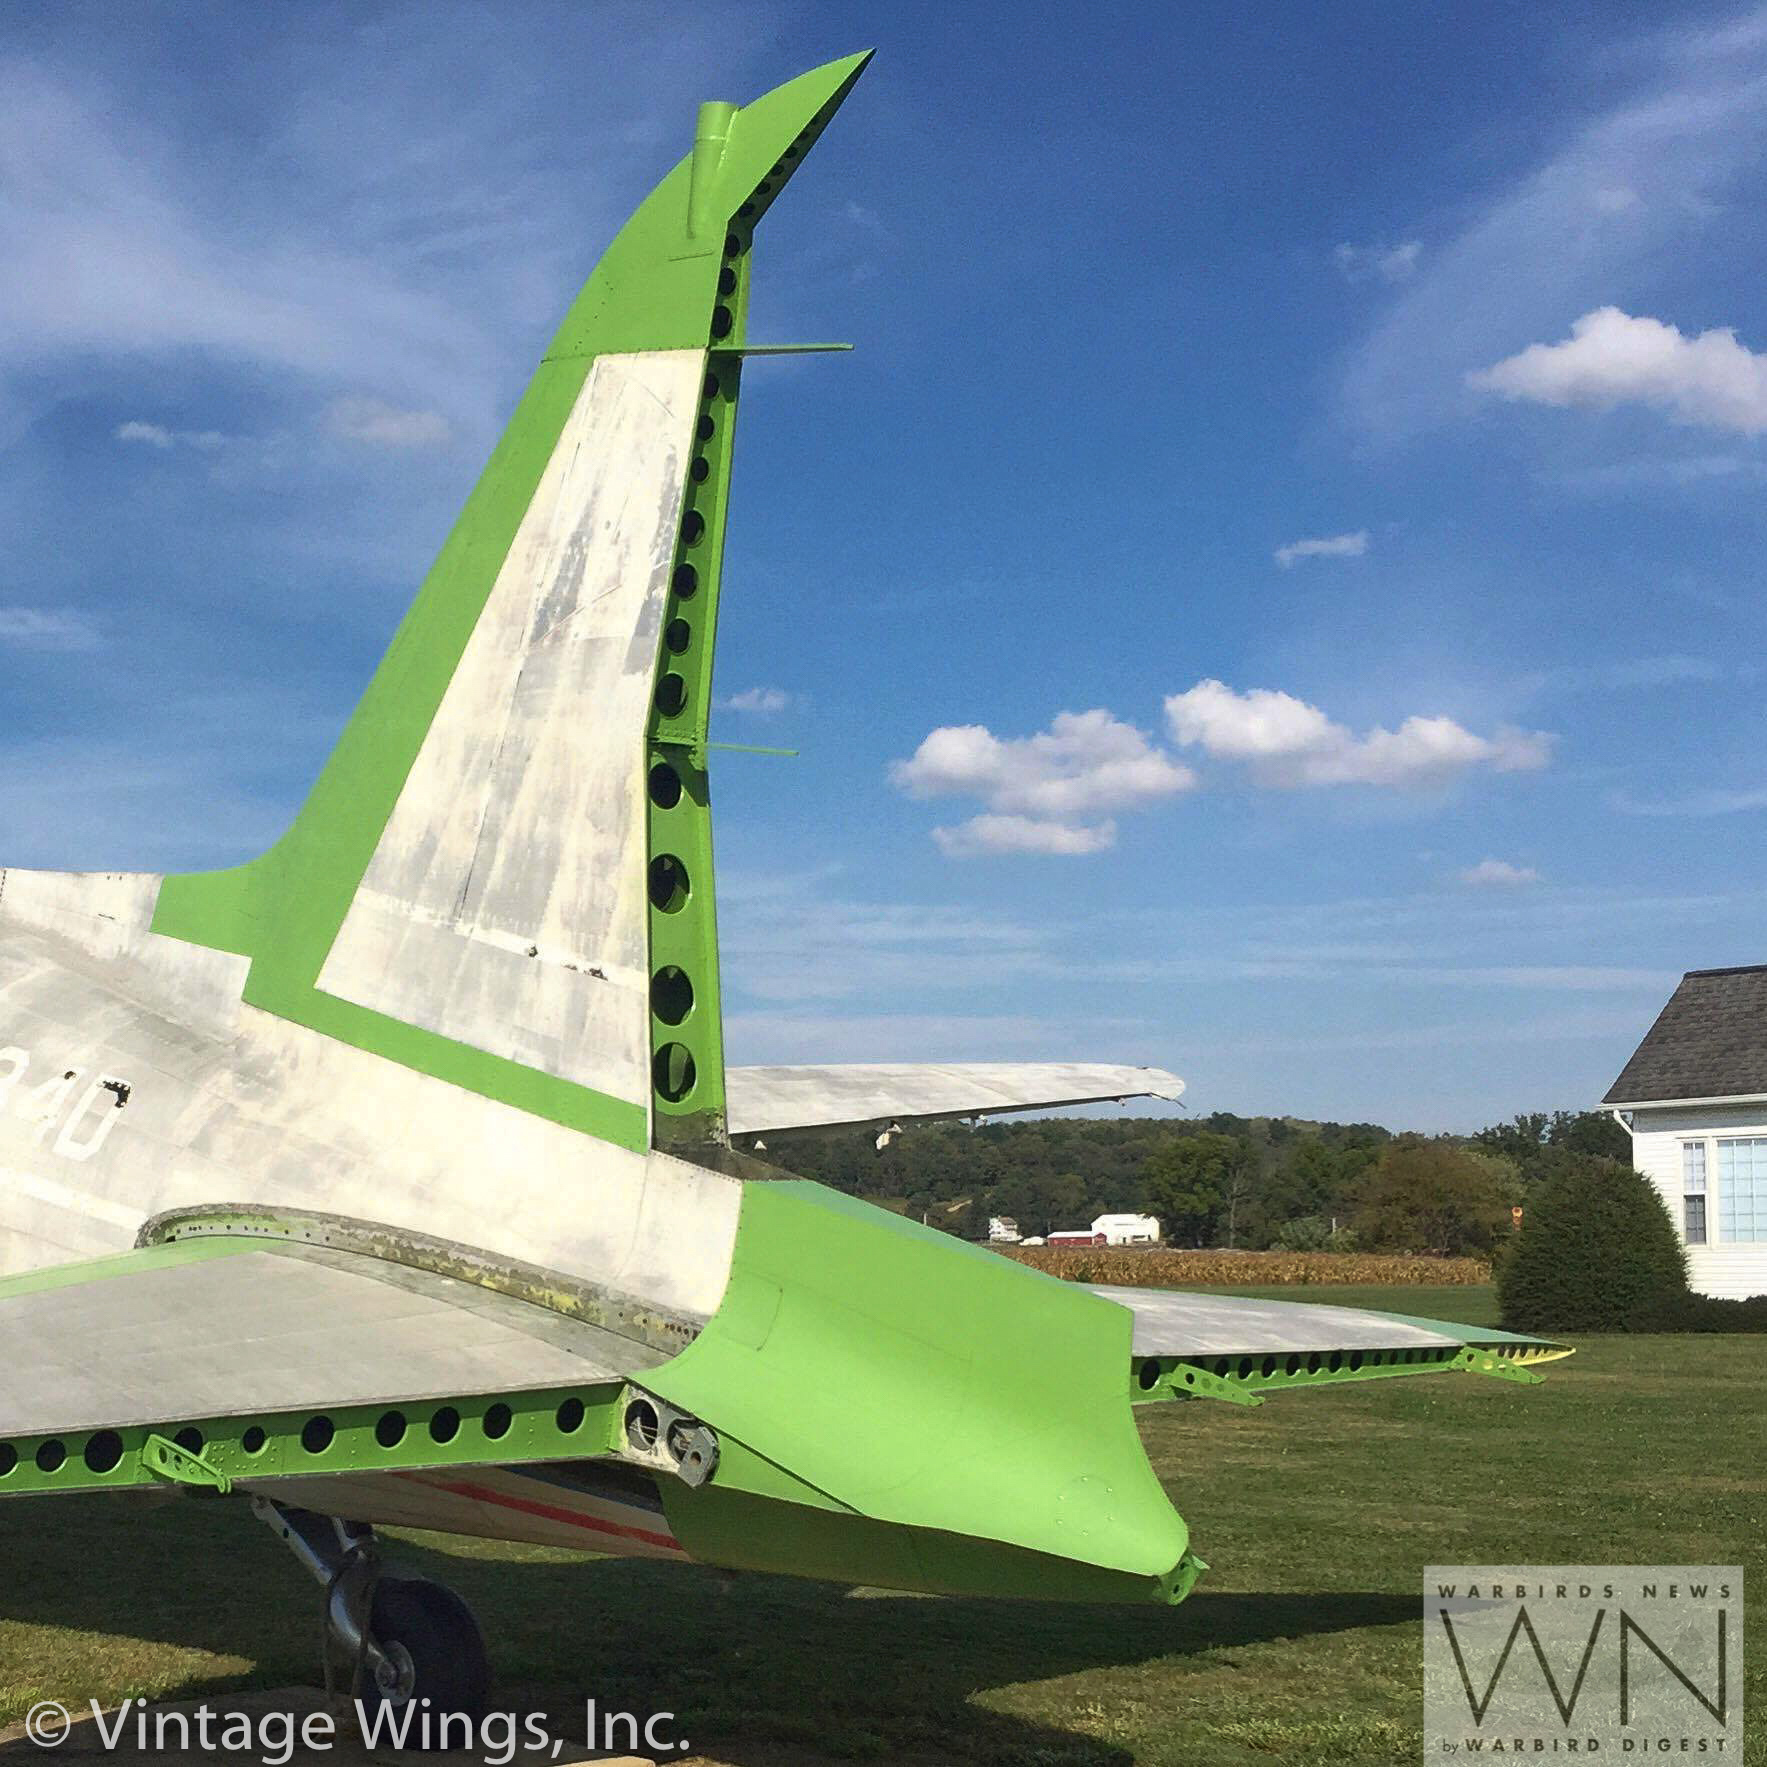 Work to restore the empennage is clearly evident in this image. Everything painted in green primer has been renewed. (photo via Vintage Wings, Inc.)